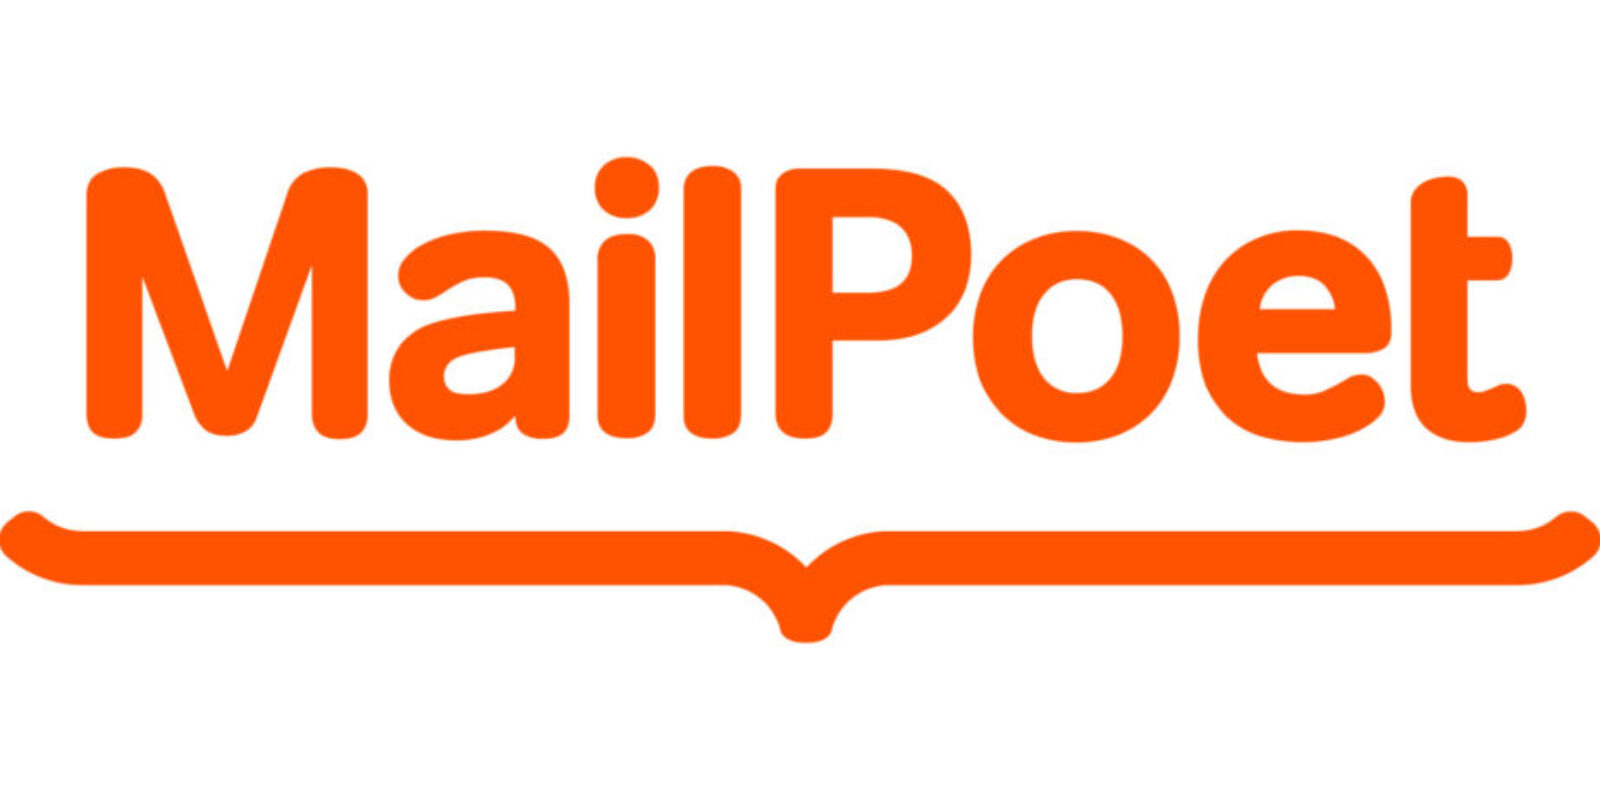 mailpoet-has-been-bought-by-woocommerce/automattic